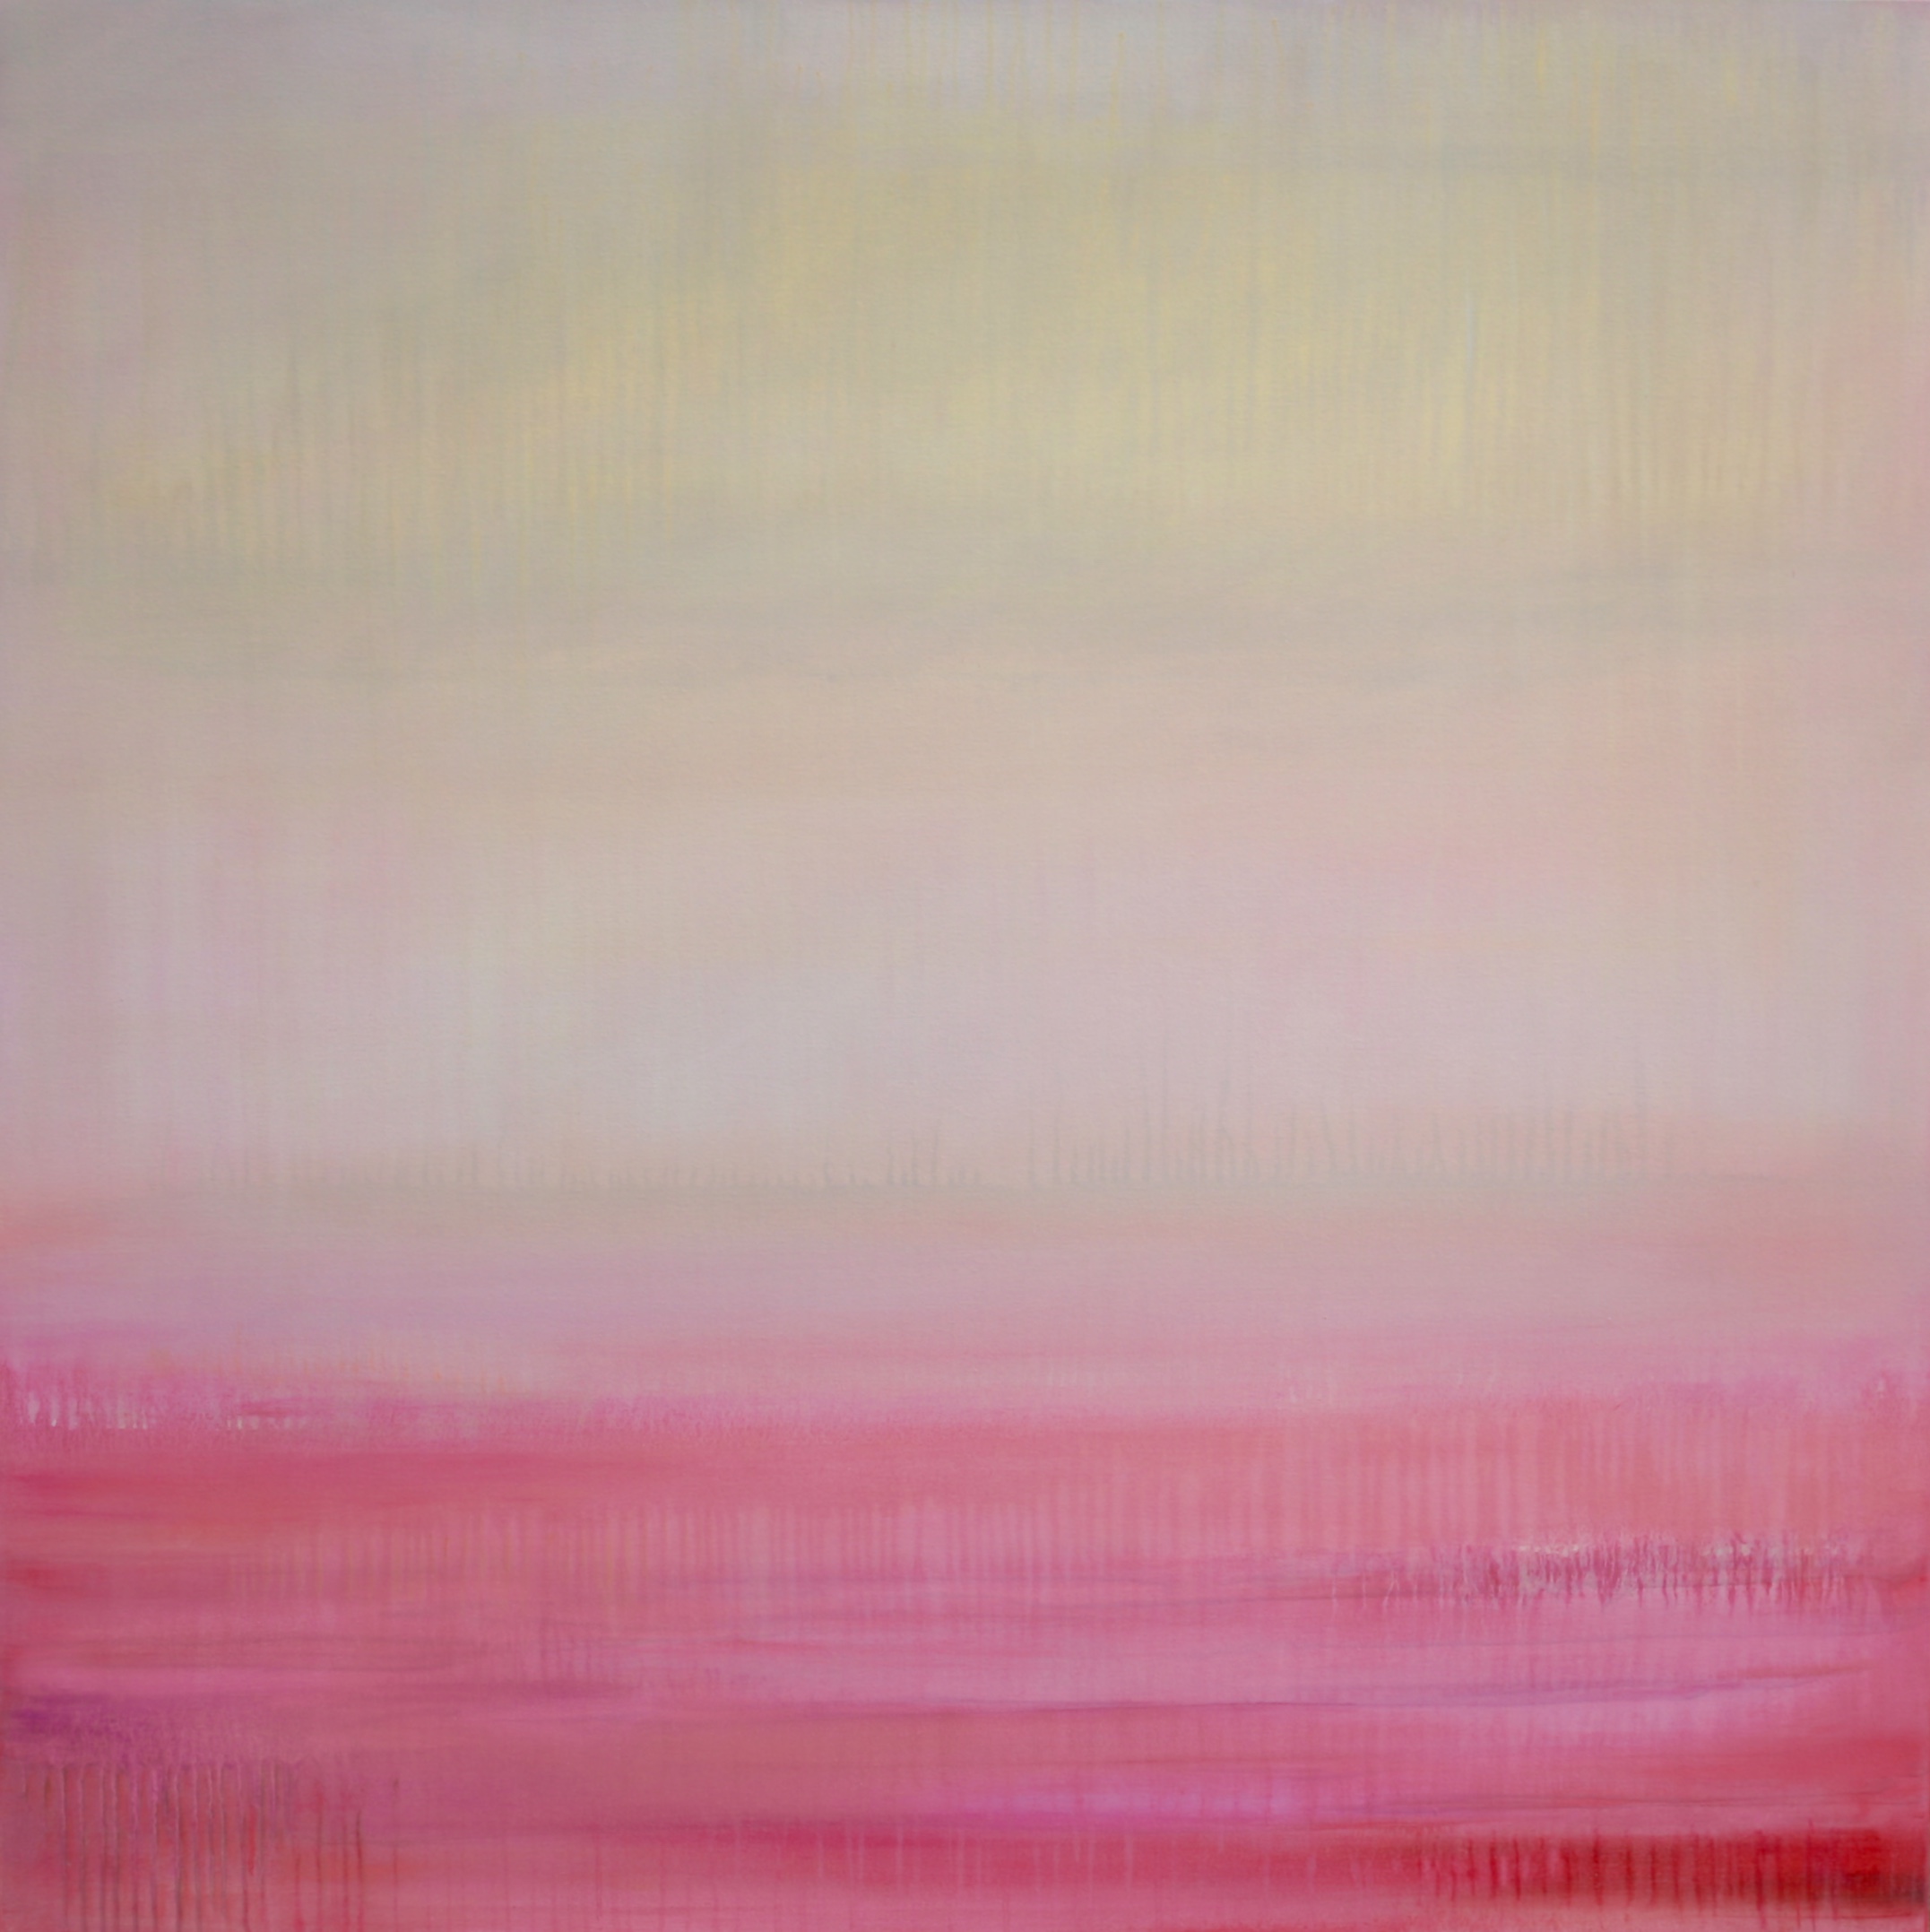 Hope Endures, 48 x 48 inches, oil on canvas